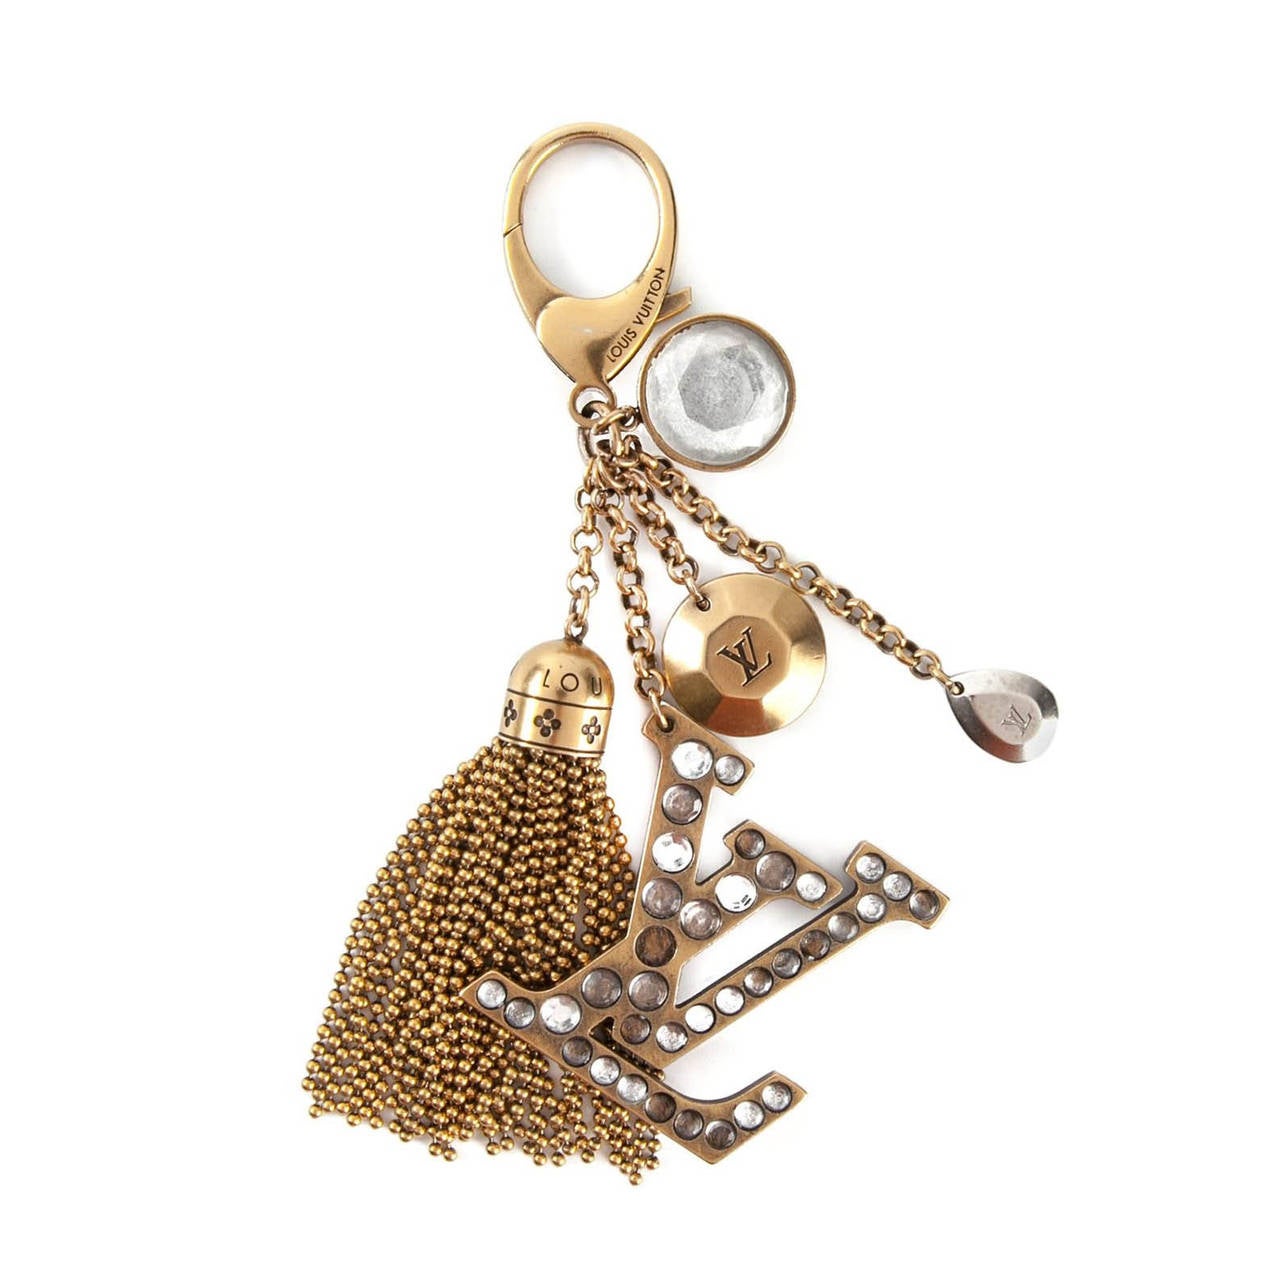 This Gold-tone logo charm keychain from Louis Vuitton features crystal accents, a clip fastening and a tassel charm.

Material: Metal

Colour: Gold, Clear